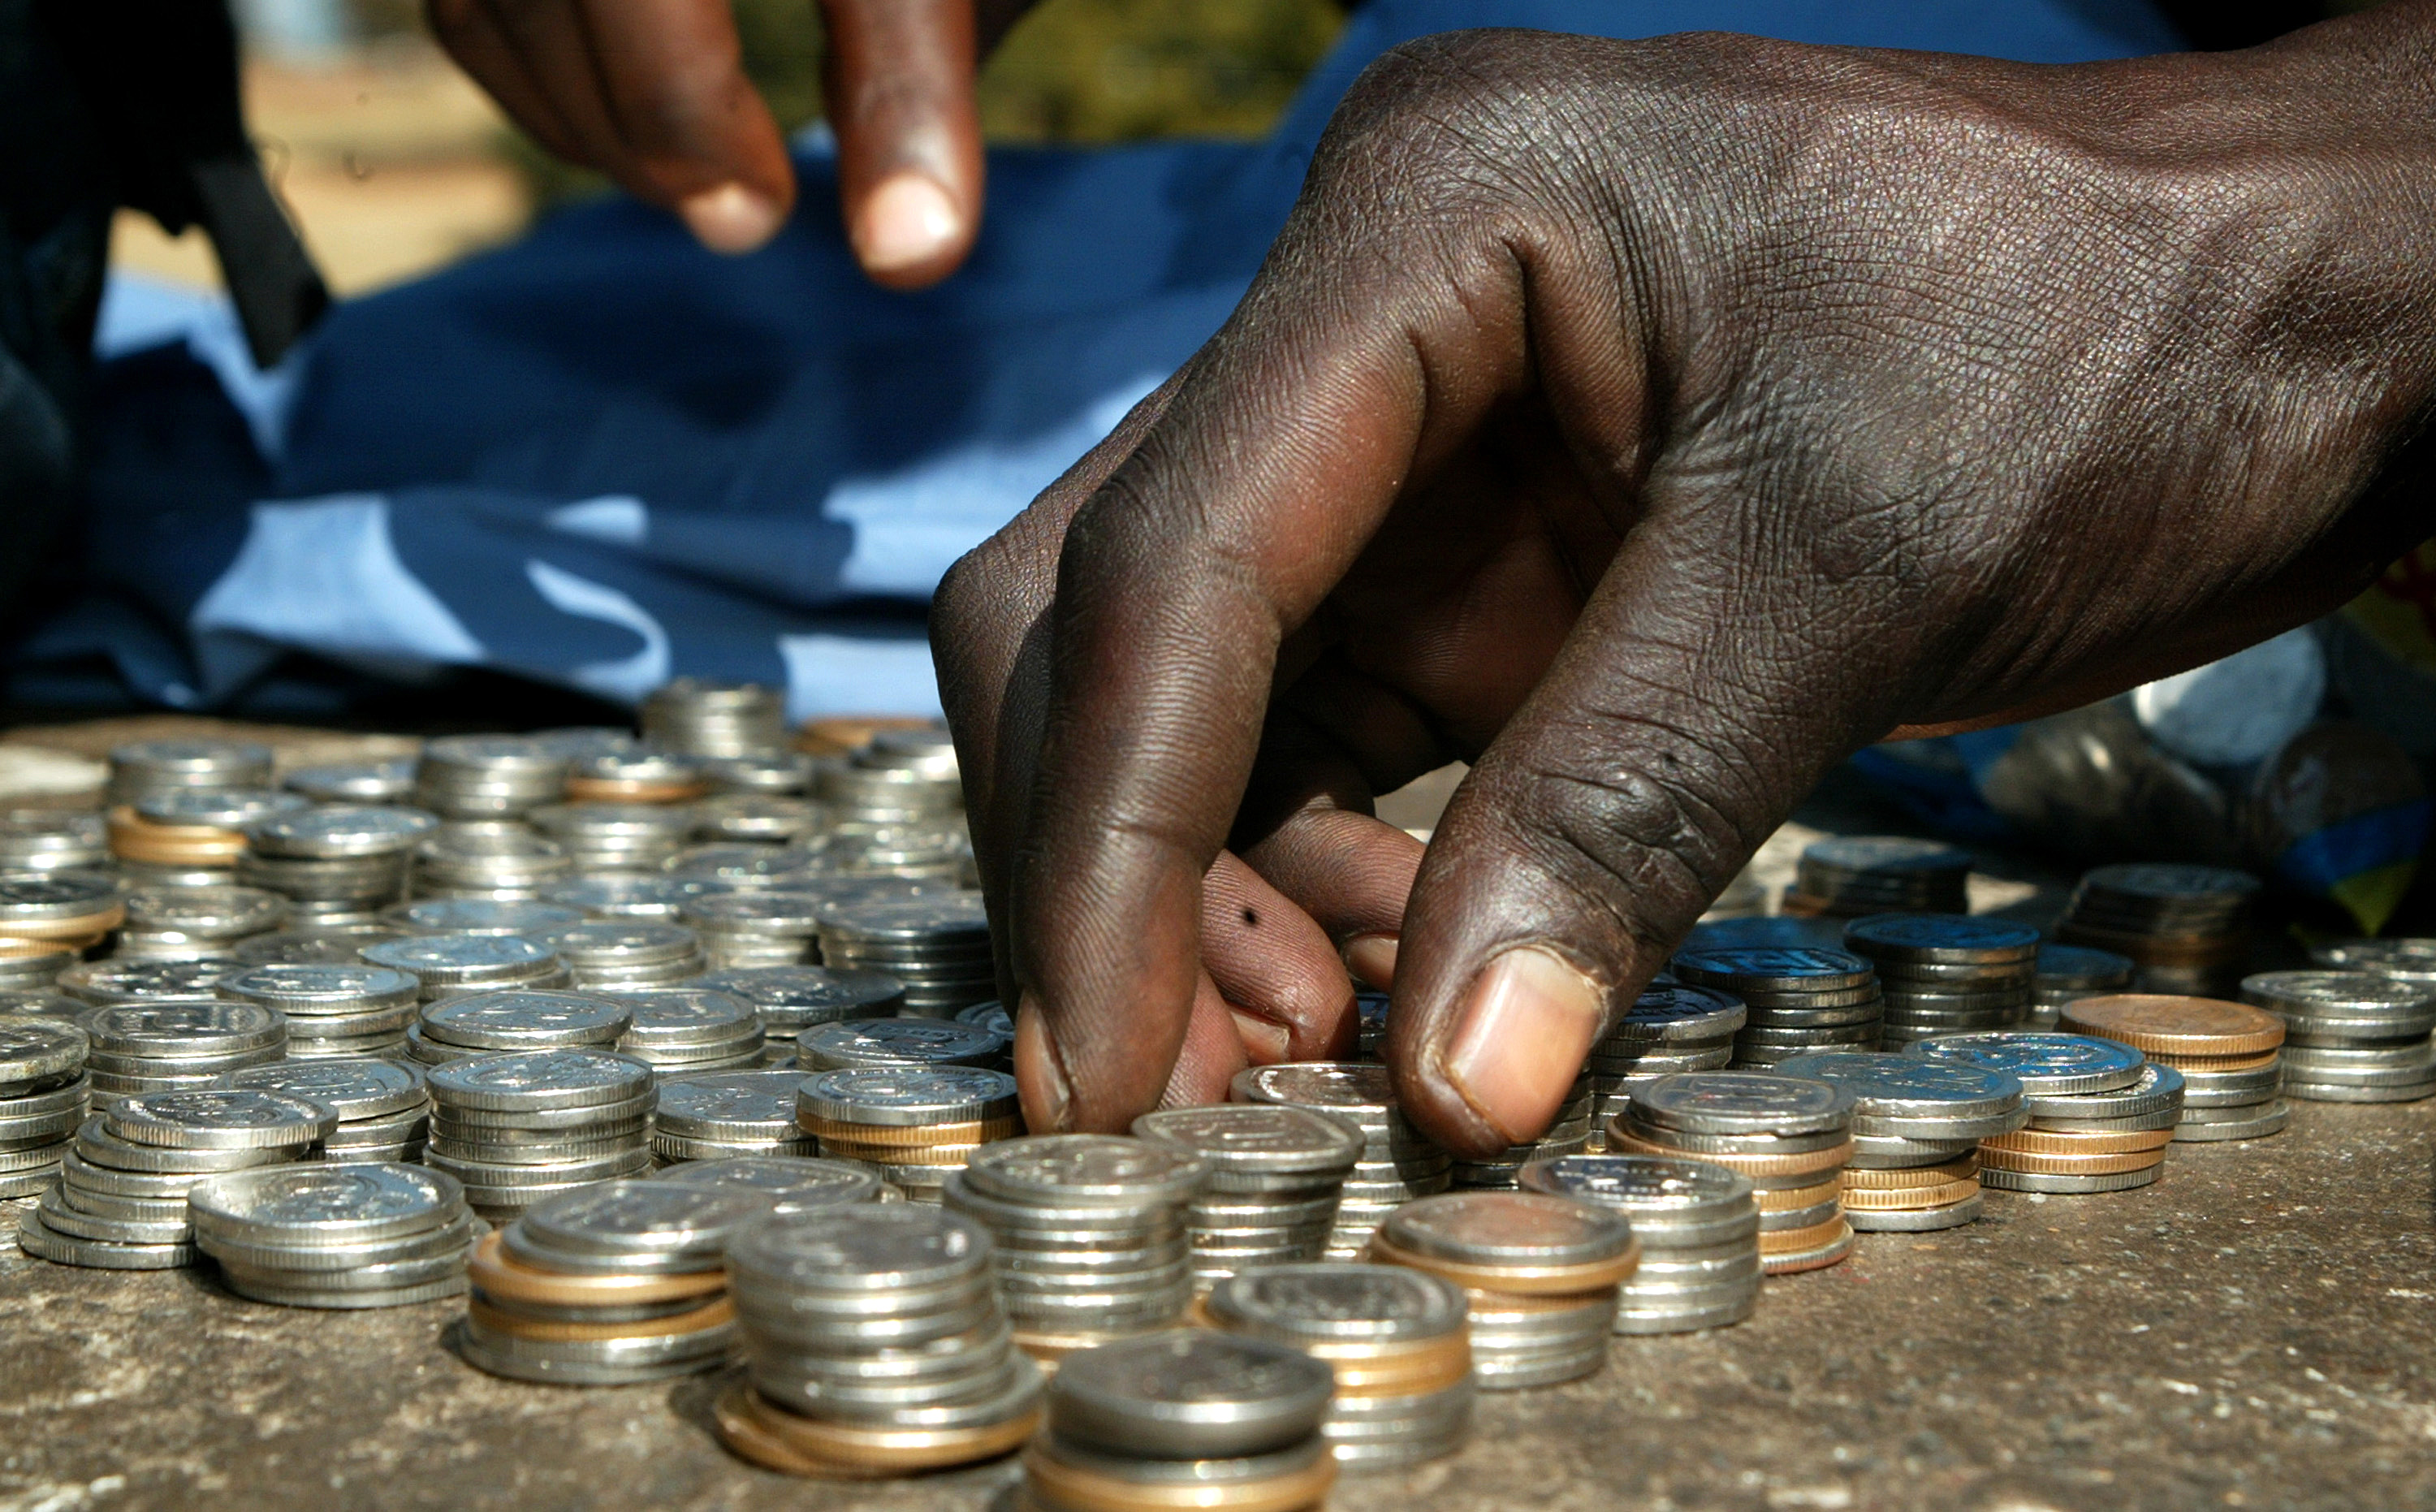 A coin vendor counts his coins on June 2